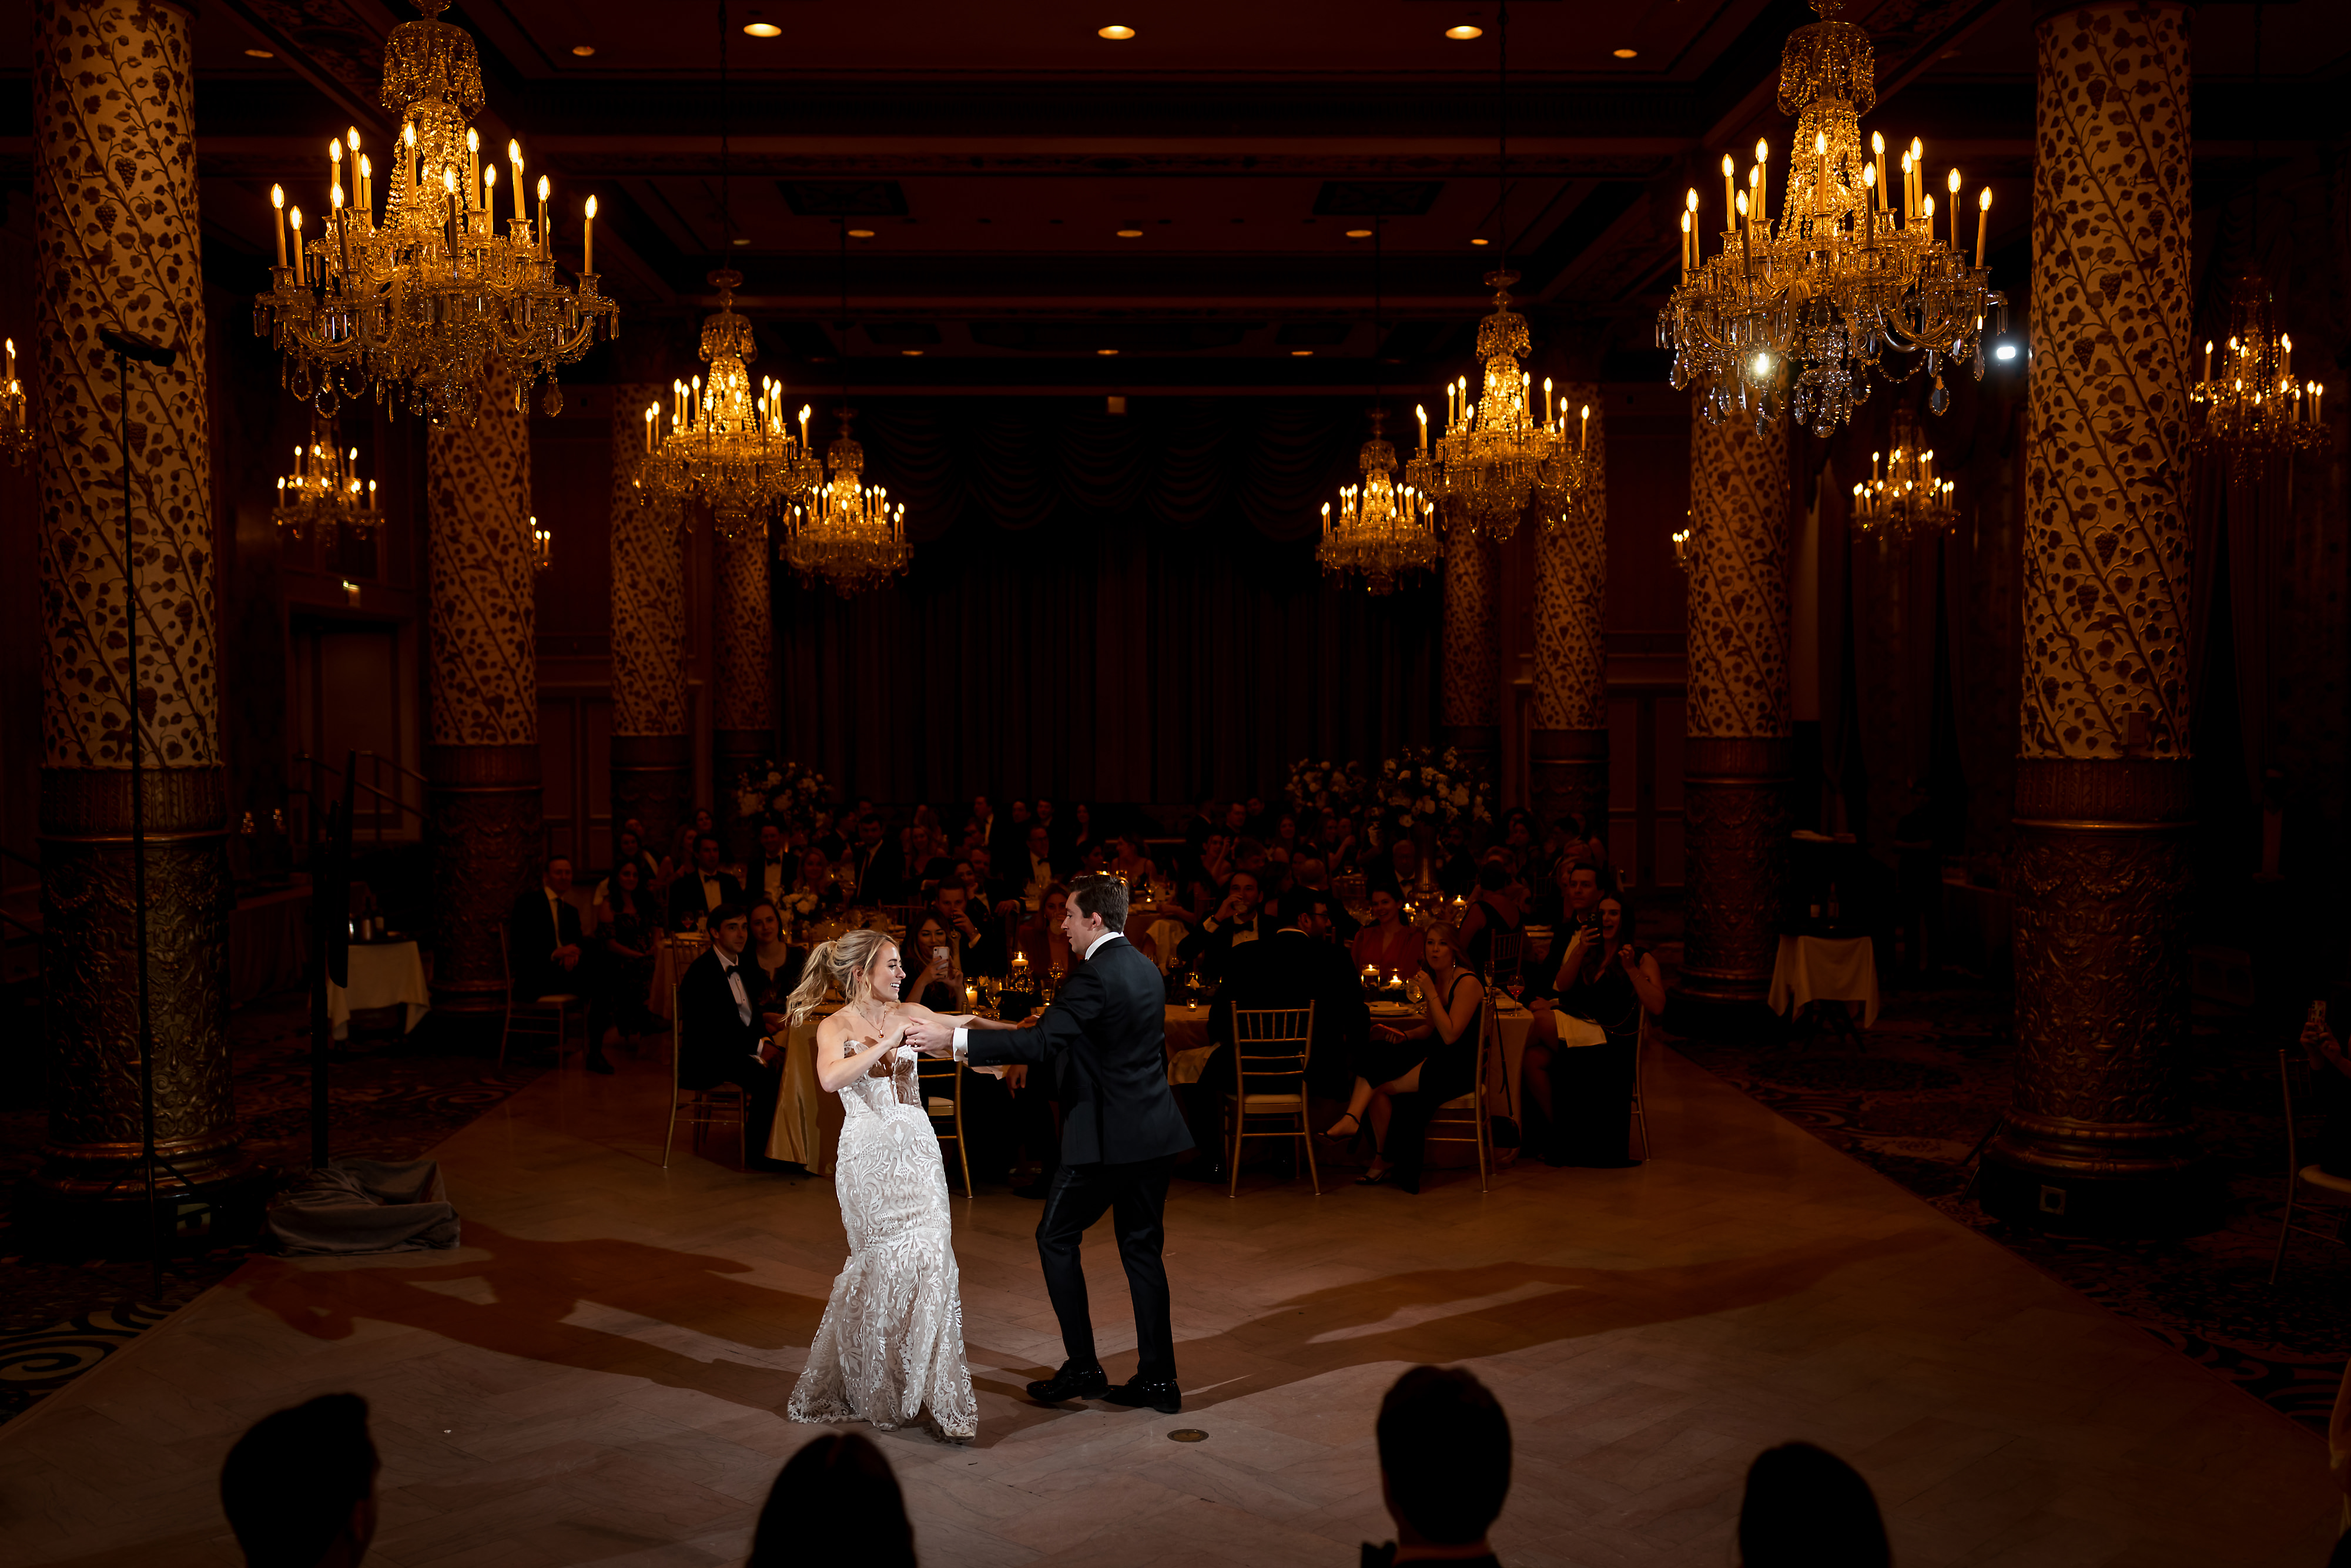 Bride and groom have their first dance during wedding reception in the Grand Ballroom at The Drake Hotel in Chicago